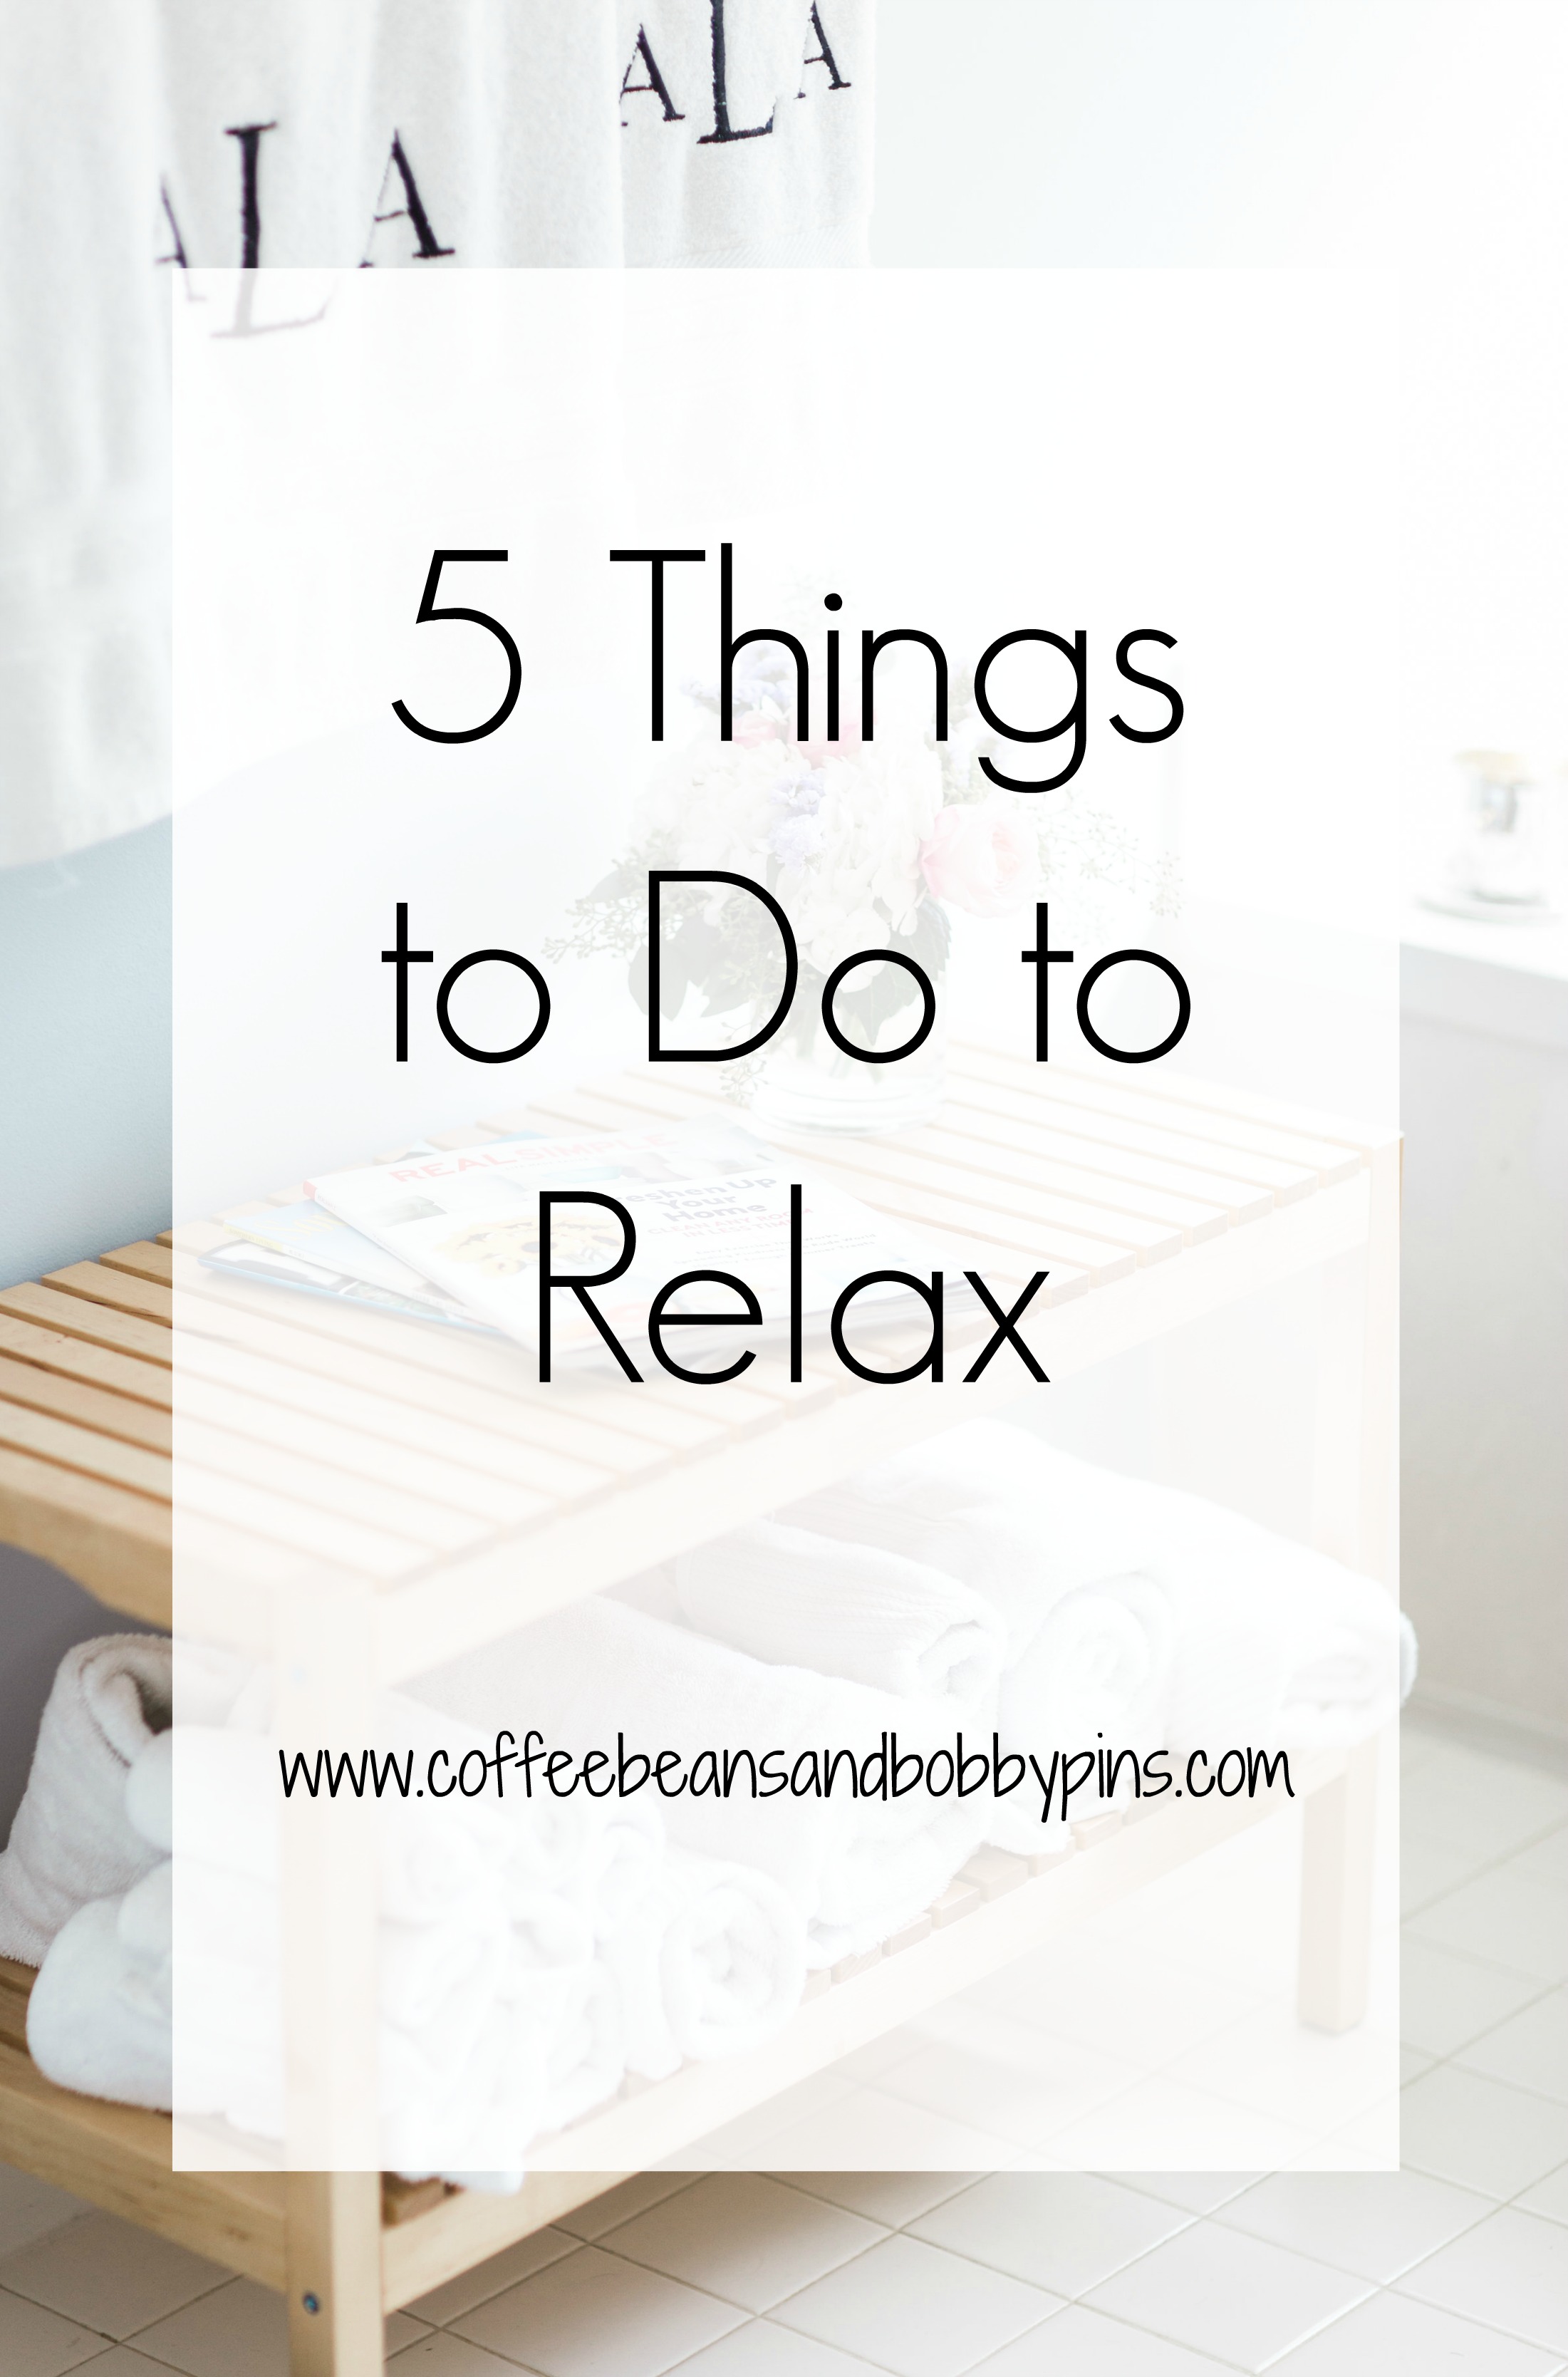 Top 5 Things to Do to Relax by NC lifestyle blogger Coffee Beans and Bobby Pins